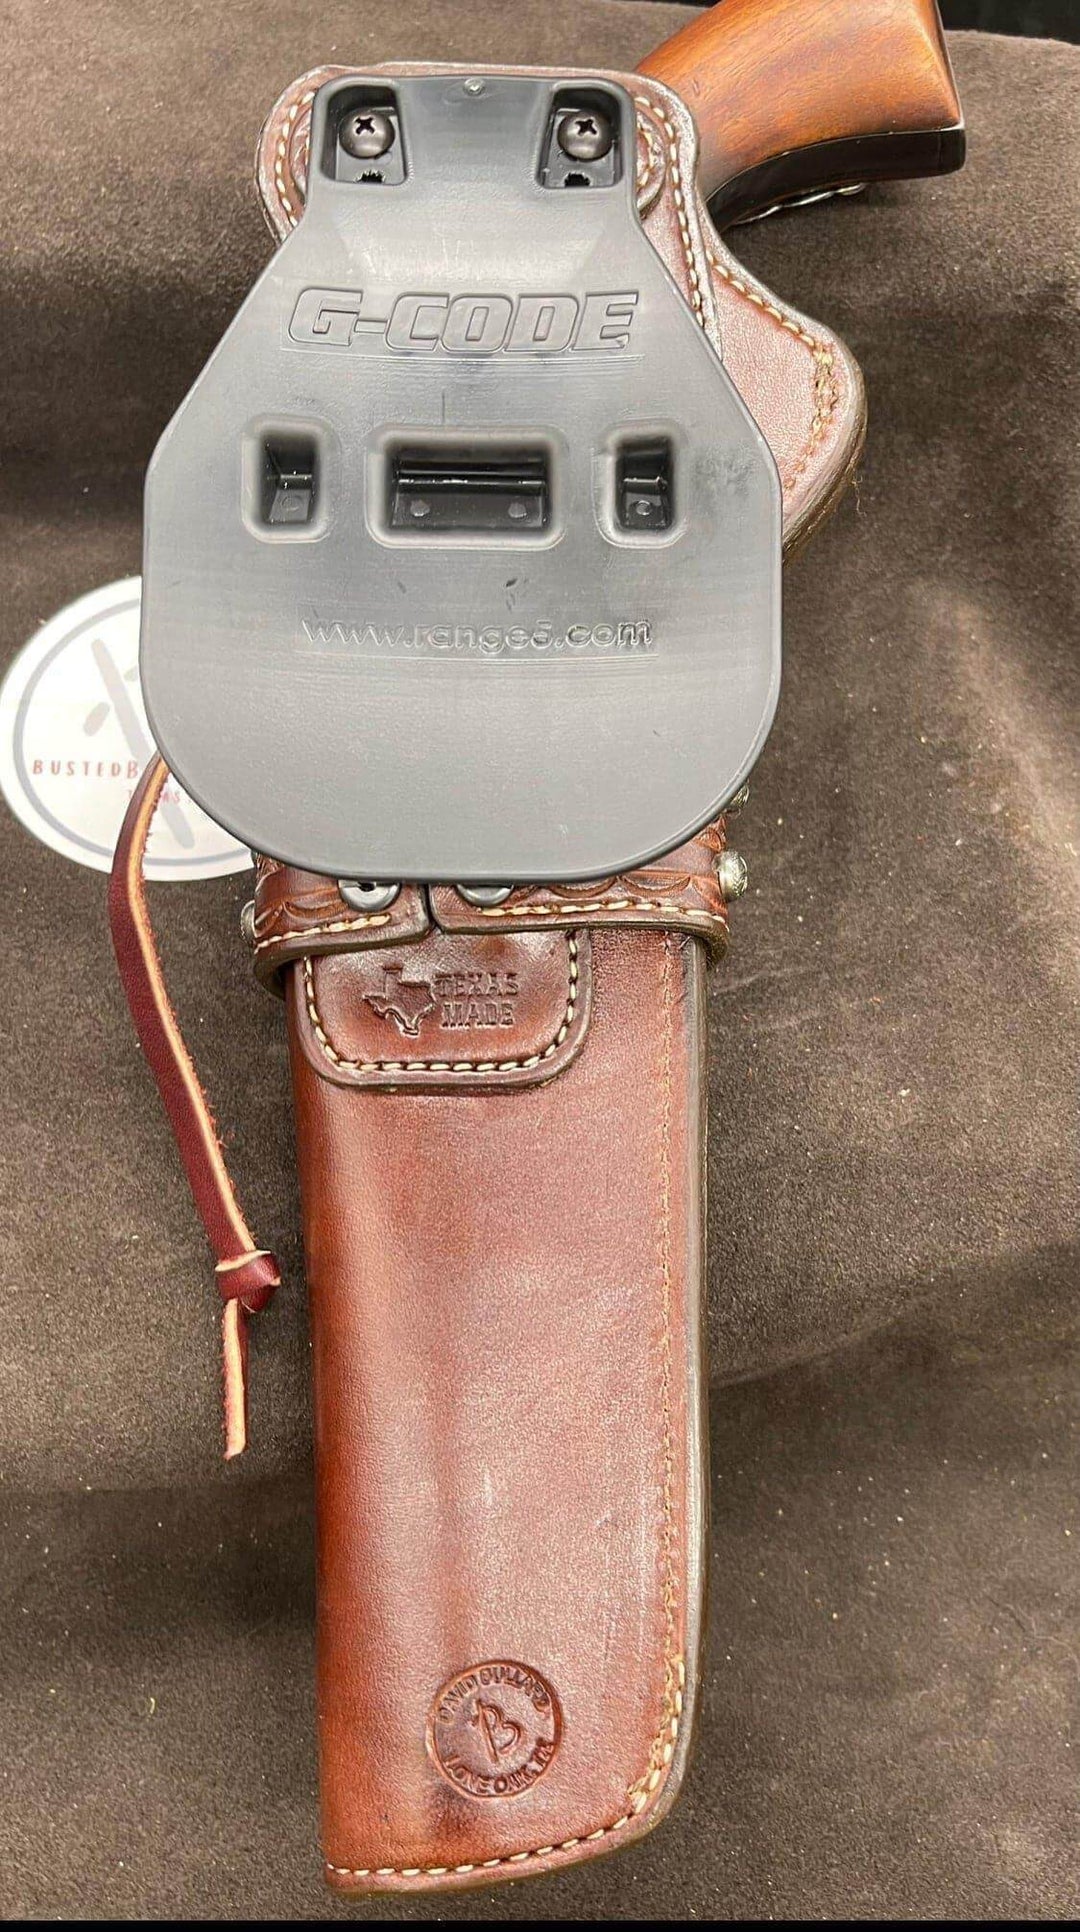 *Made to Order* LH/RH Paddle Rancher Cowboy Holster for Single Action Revolvers “The Pecos" w/Buffalo Nickel Concho’s-Busted B Leather